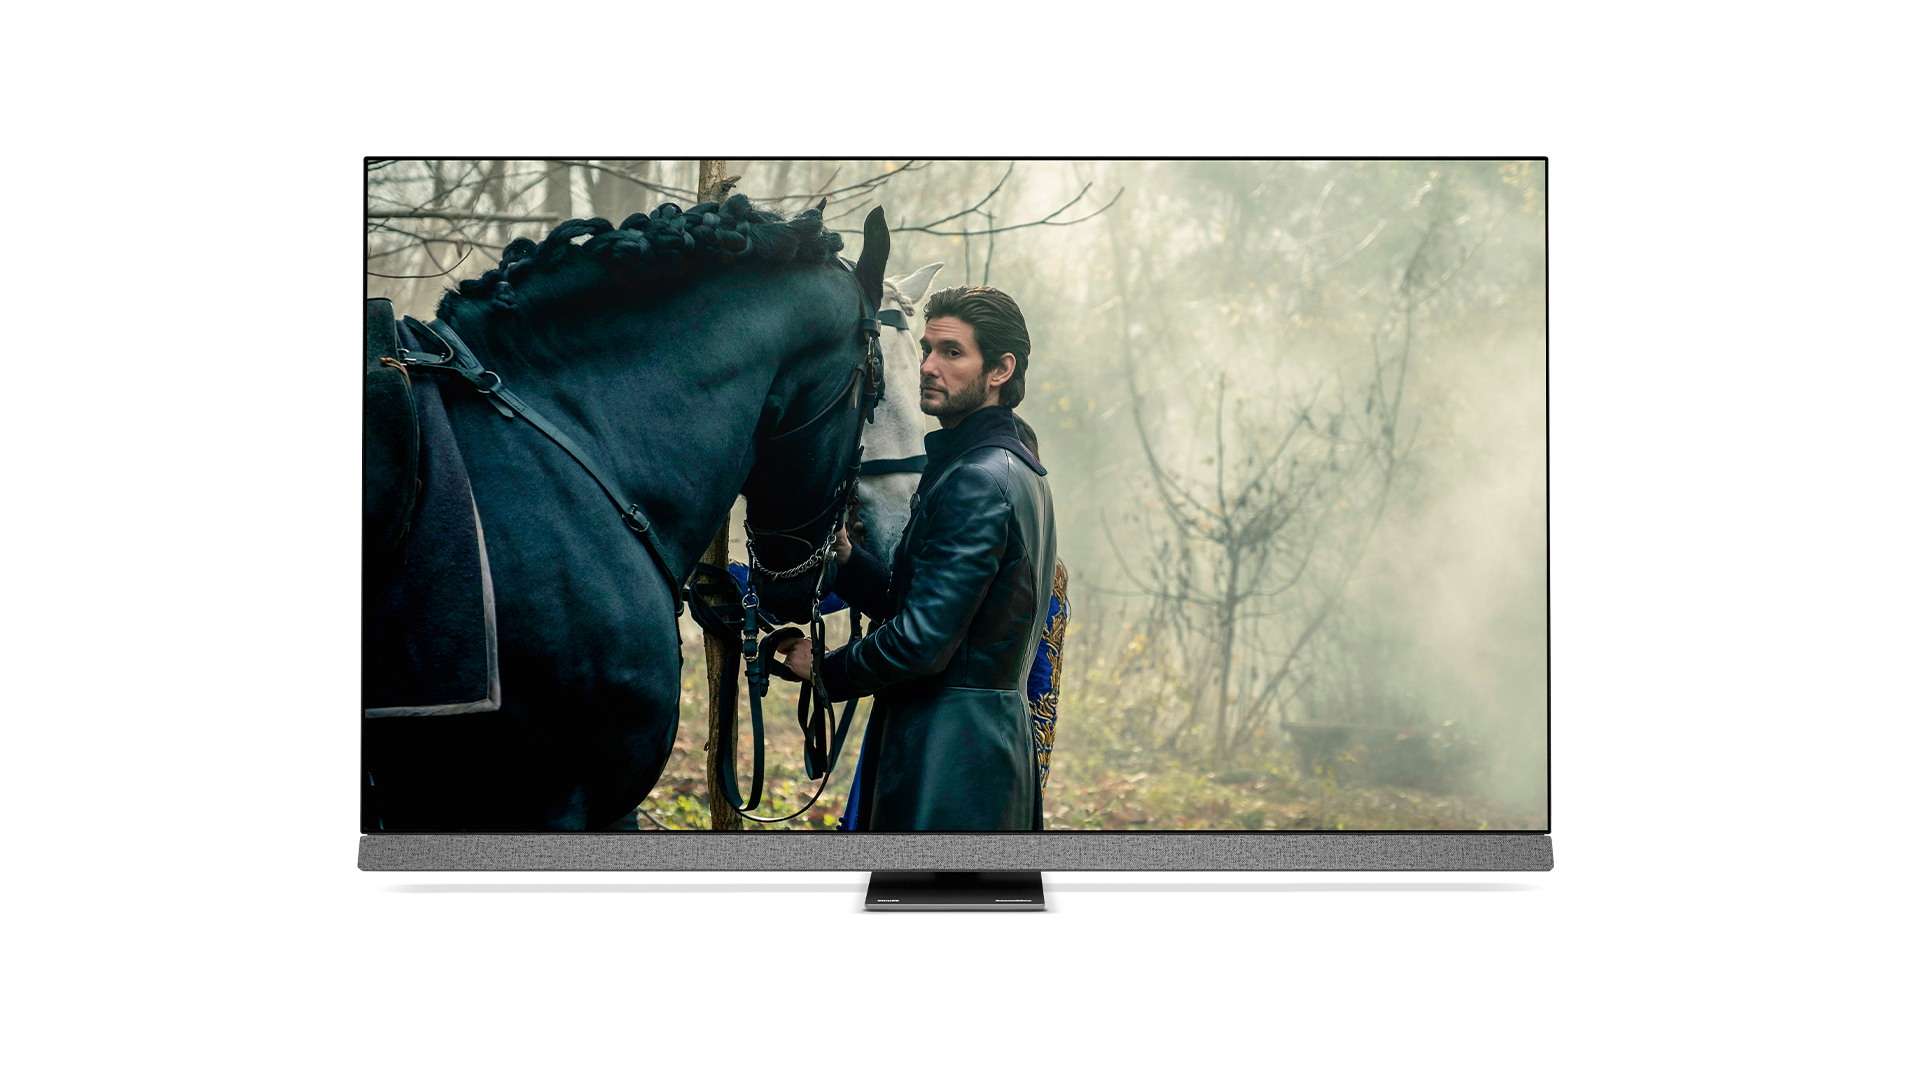 Remember how amazing Philips Ambilight was? This kit on  adds the  same feature to any TV